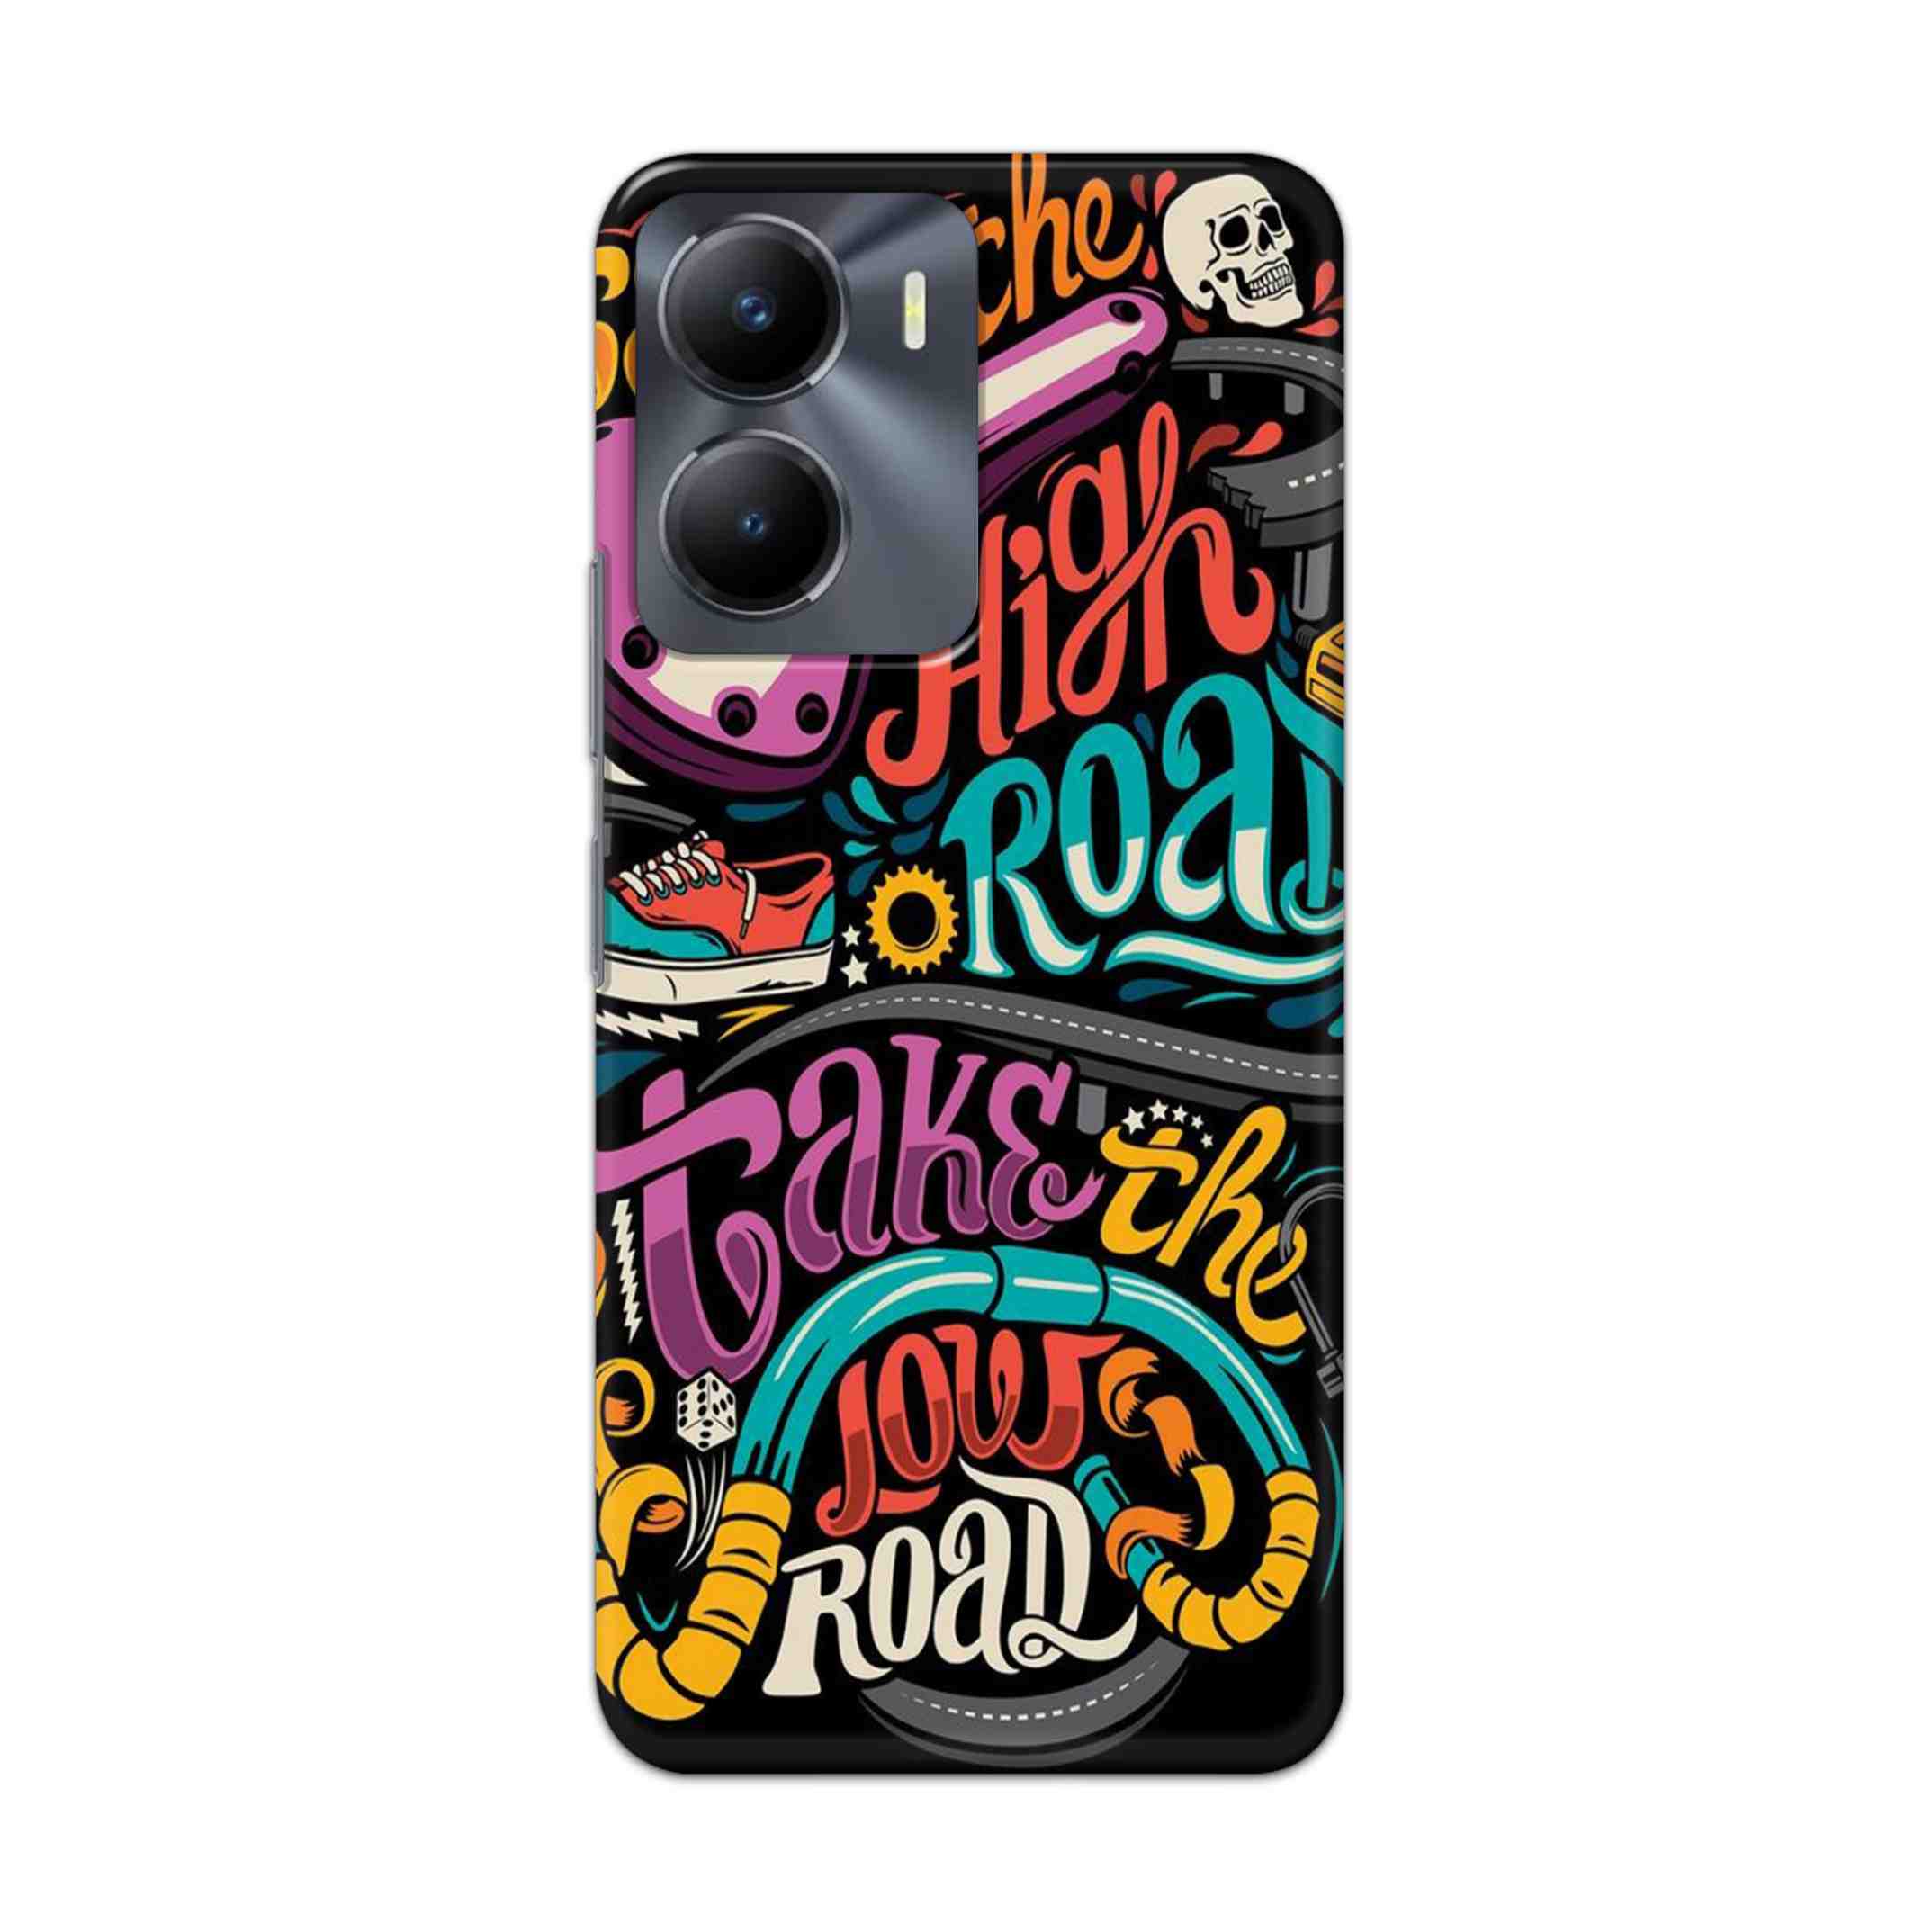 Buy Take The High Road Hard Back Mobile Phone Case Cover For Vivo Y56 Online